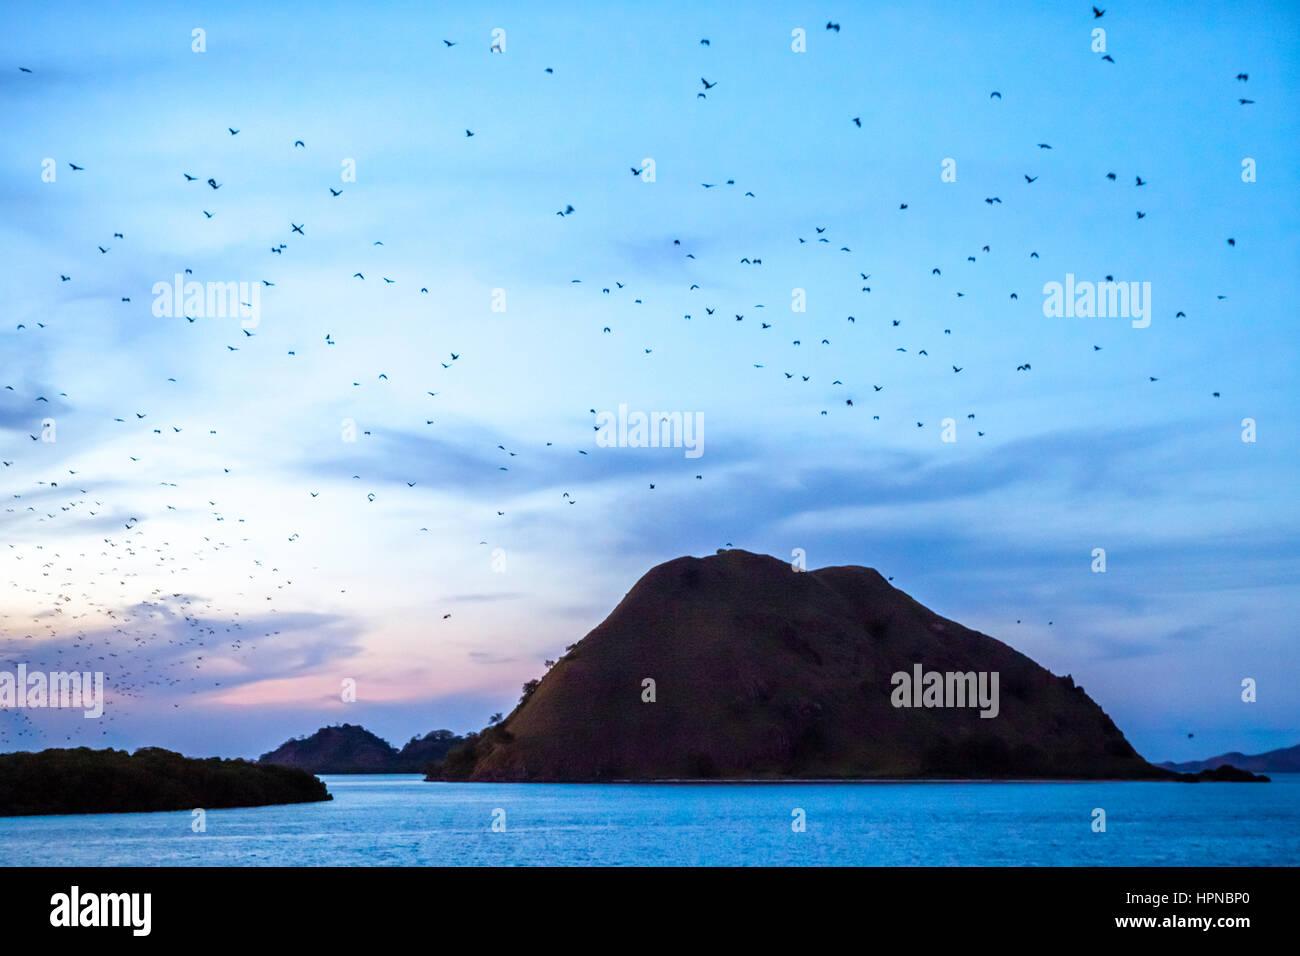 Bats flying on the sky, leaving their nesting island, Pulau Kalong (Bat Island) around sunset time within Komodo National Park area in Indonesia. Stock Photo